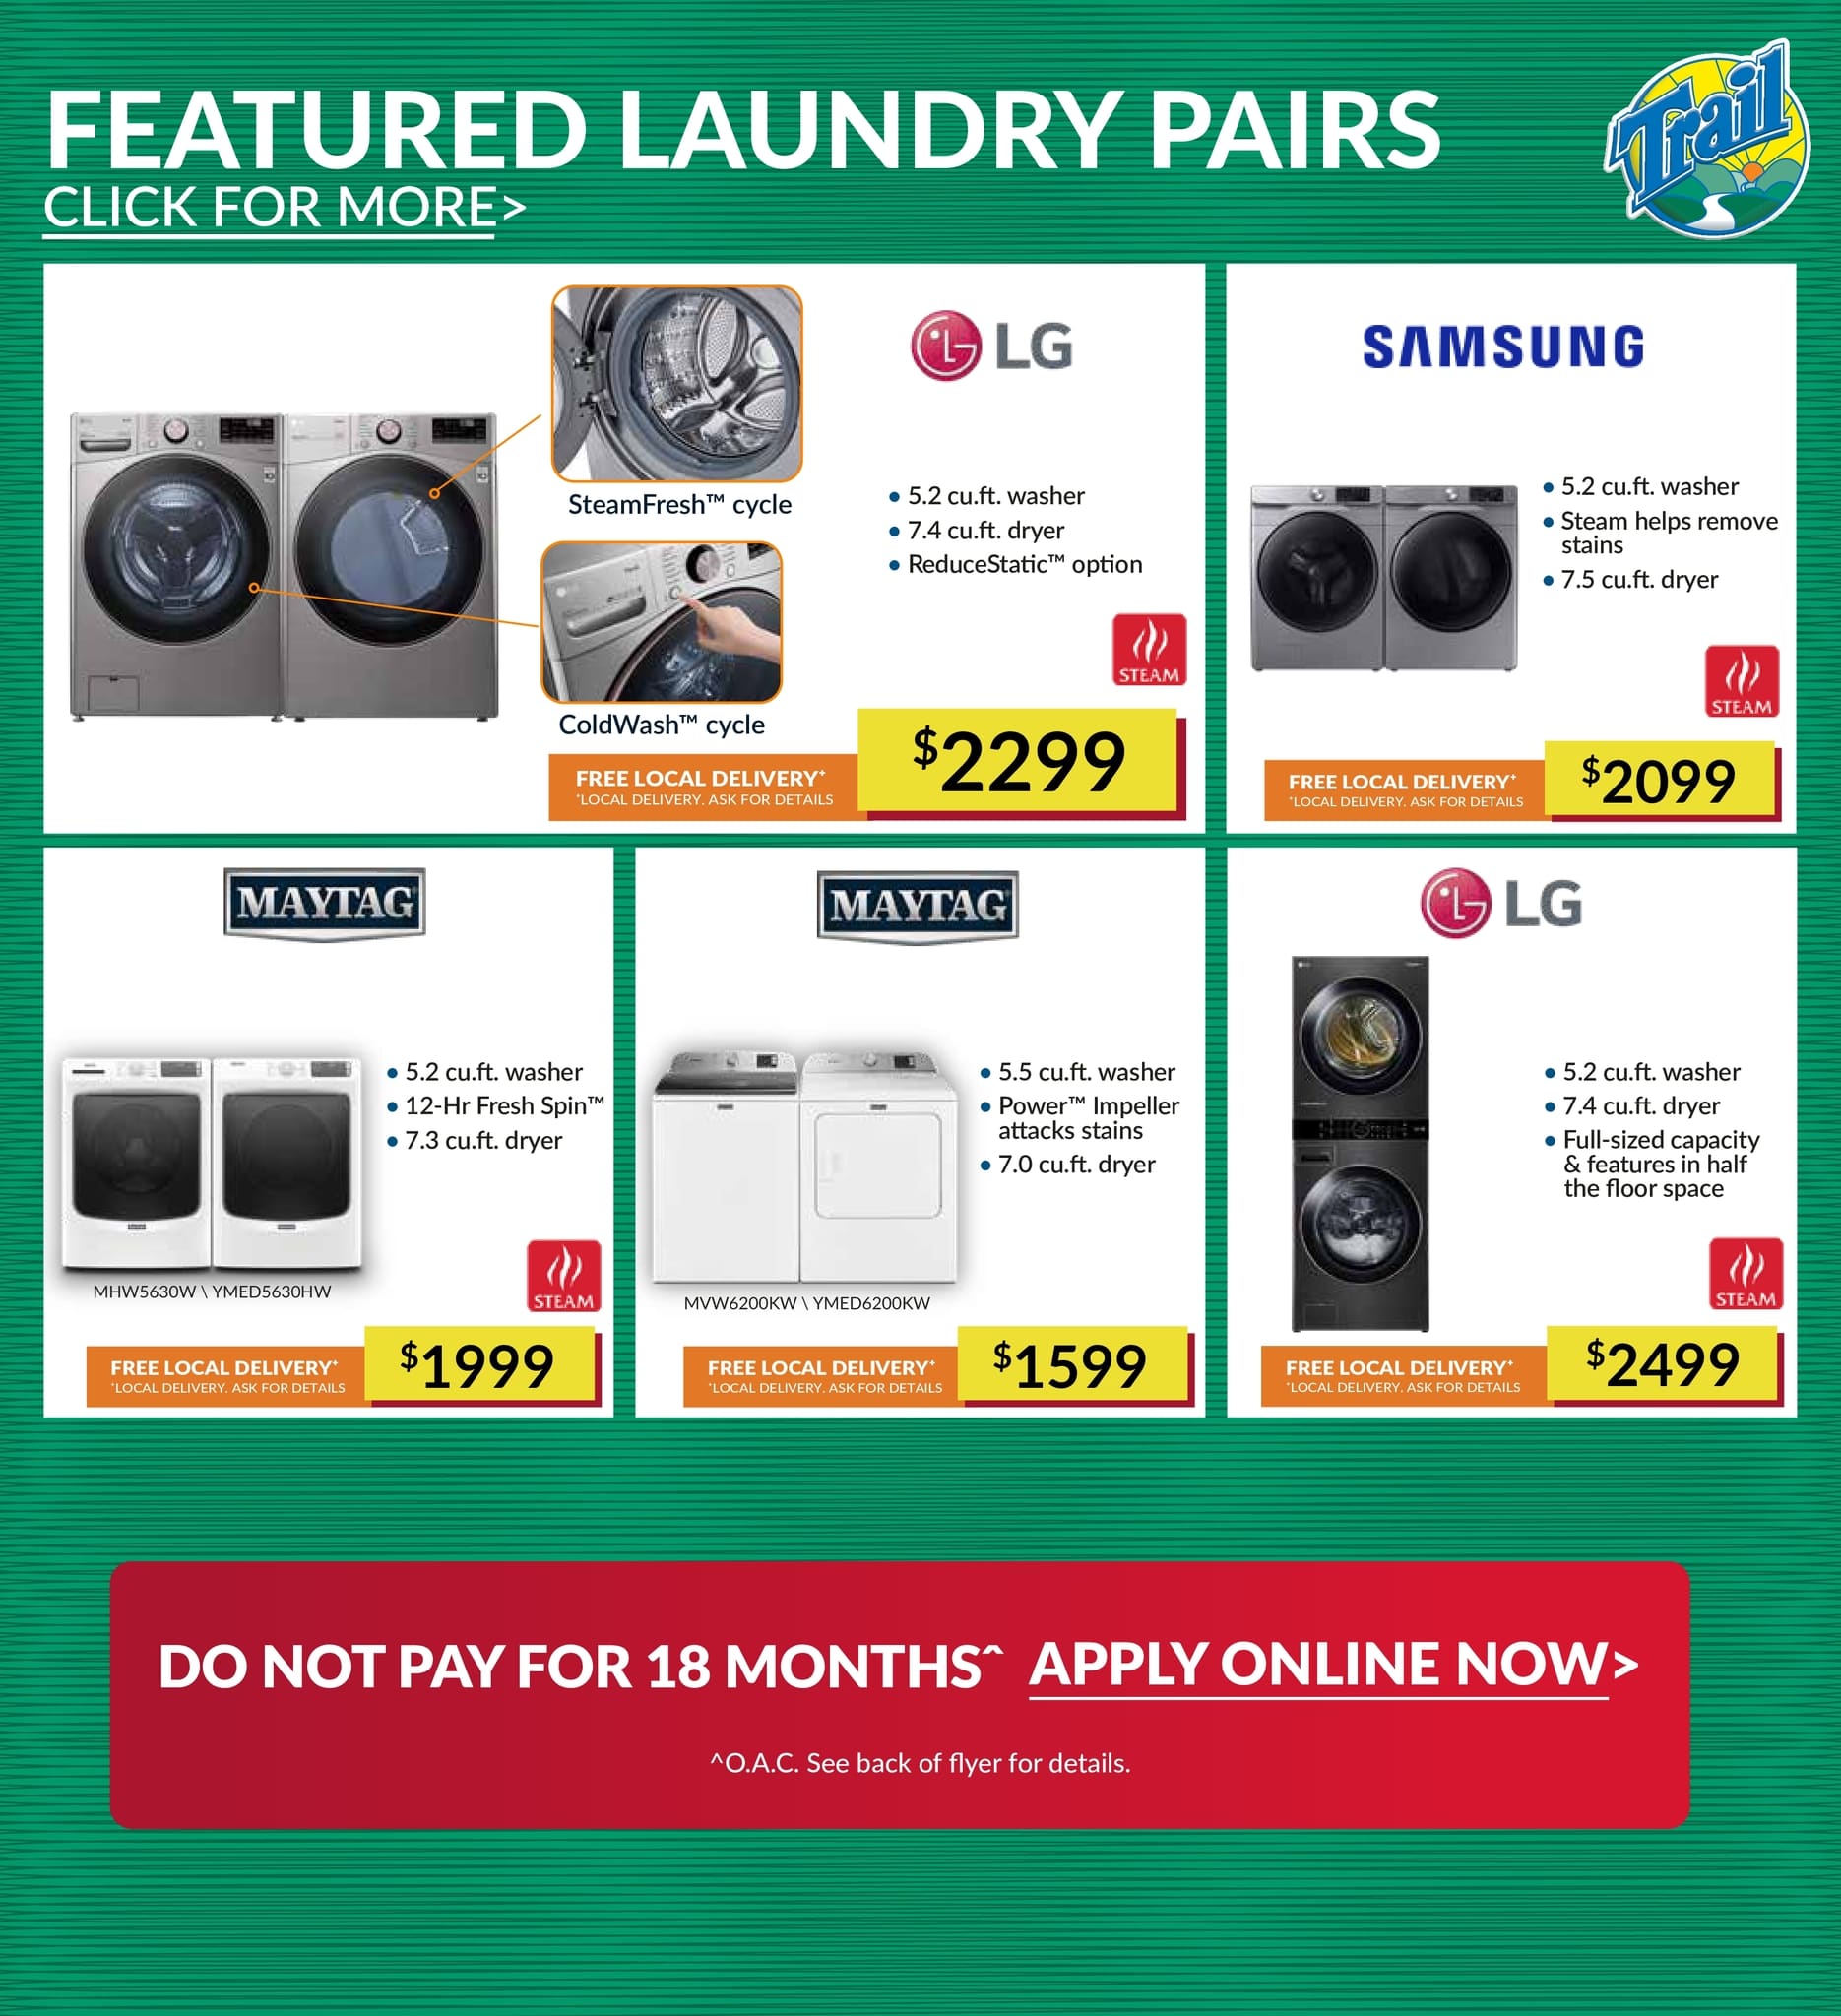 Trail Appliances - Weekly Flyer Specials - Page 7